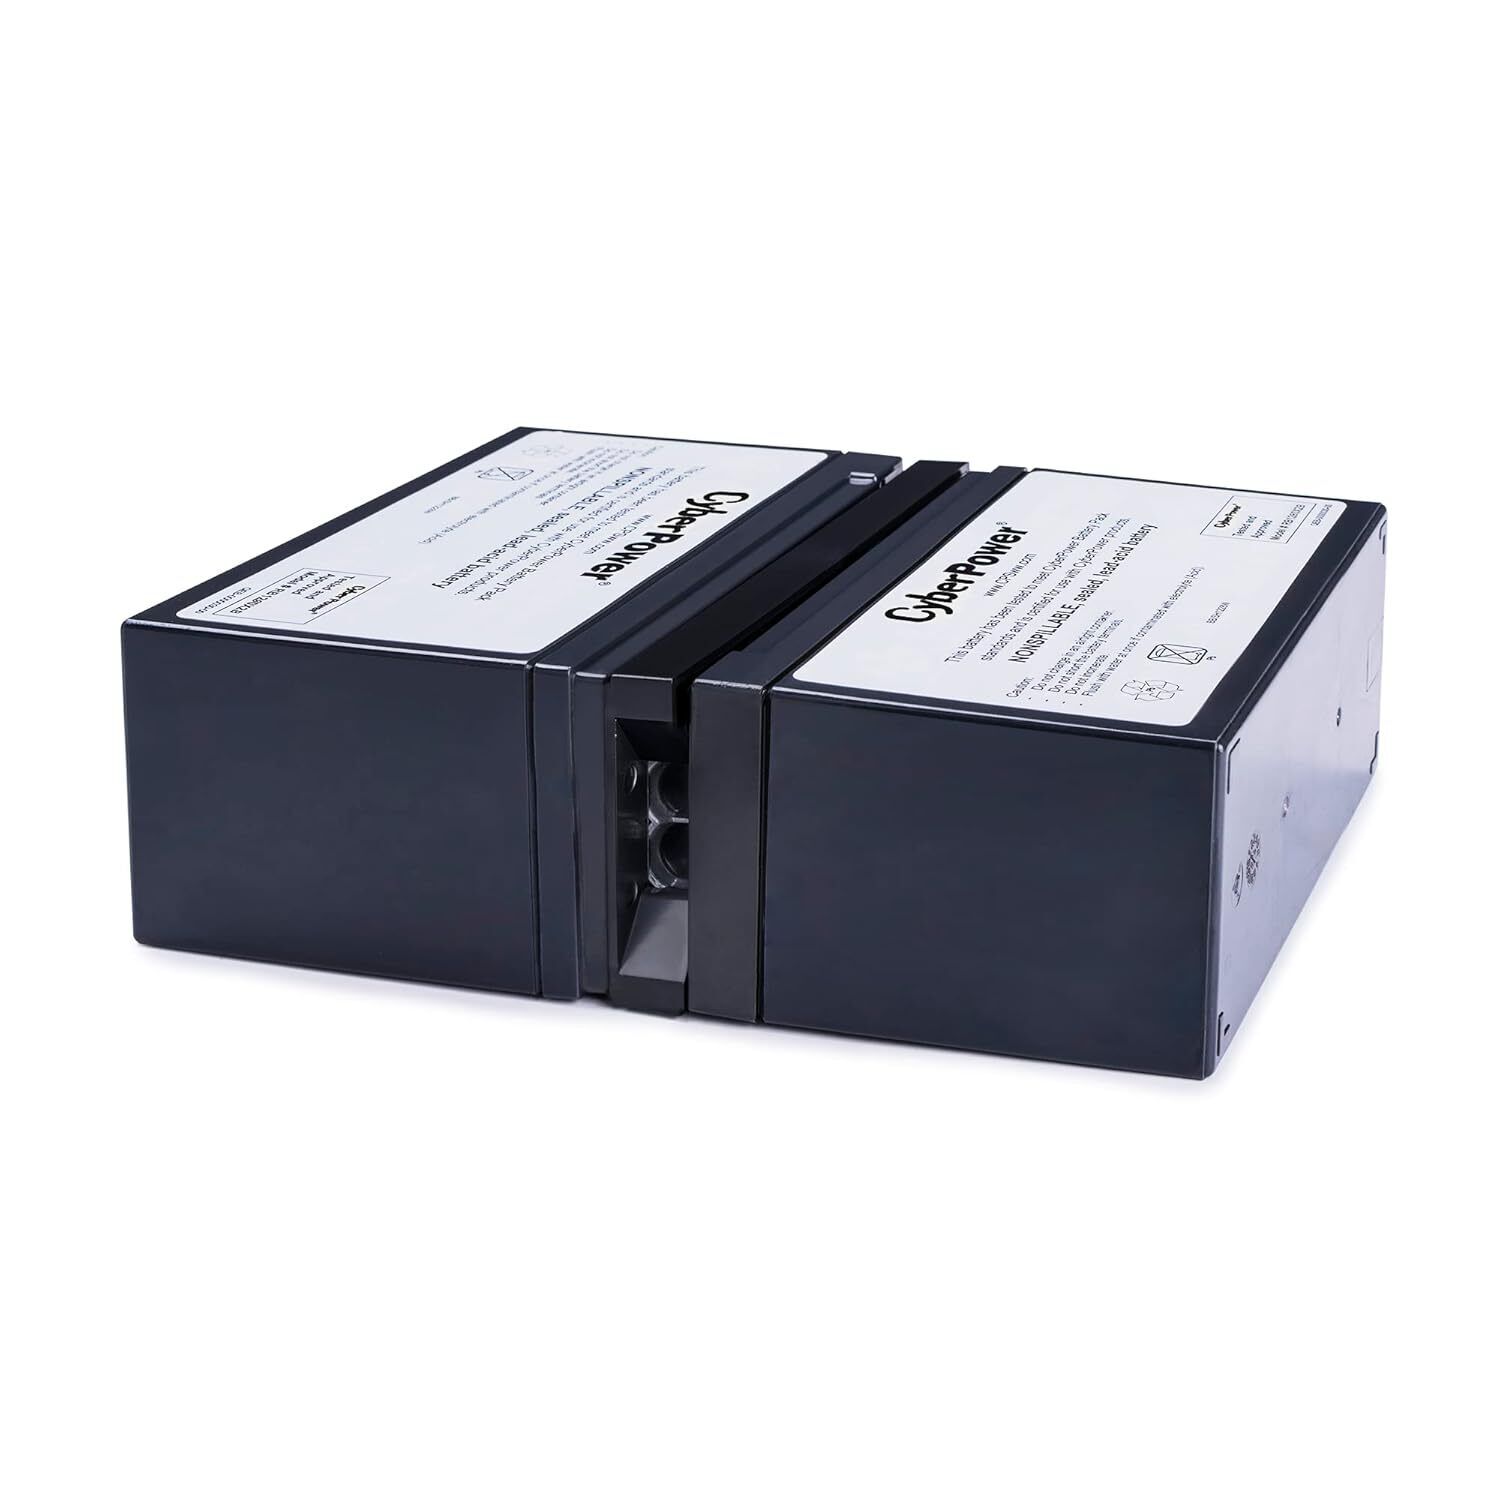 CyberPower RB1280X2B UPS Replacement Battery Cartridge, Maintenance-Free, User